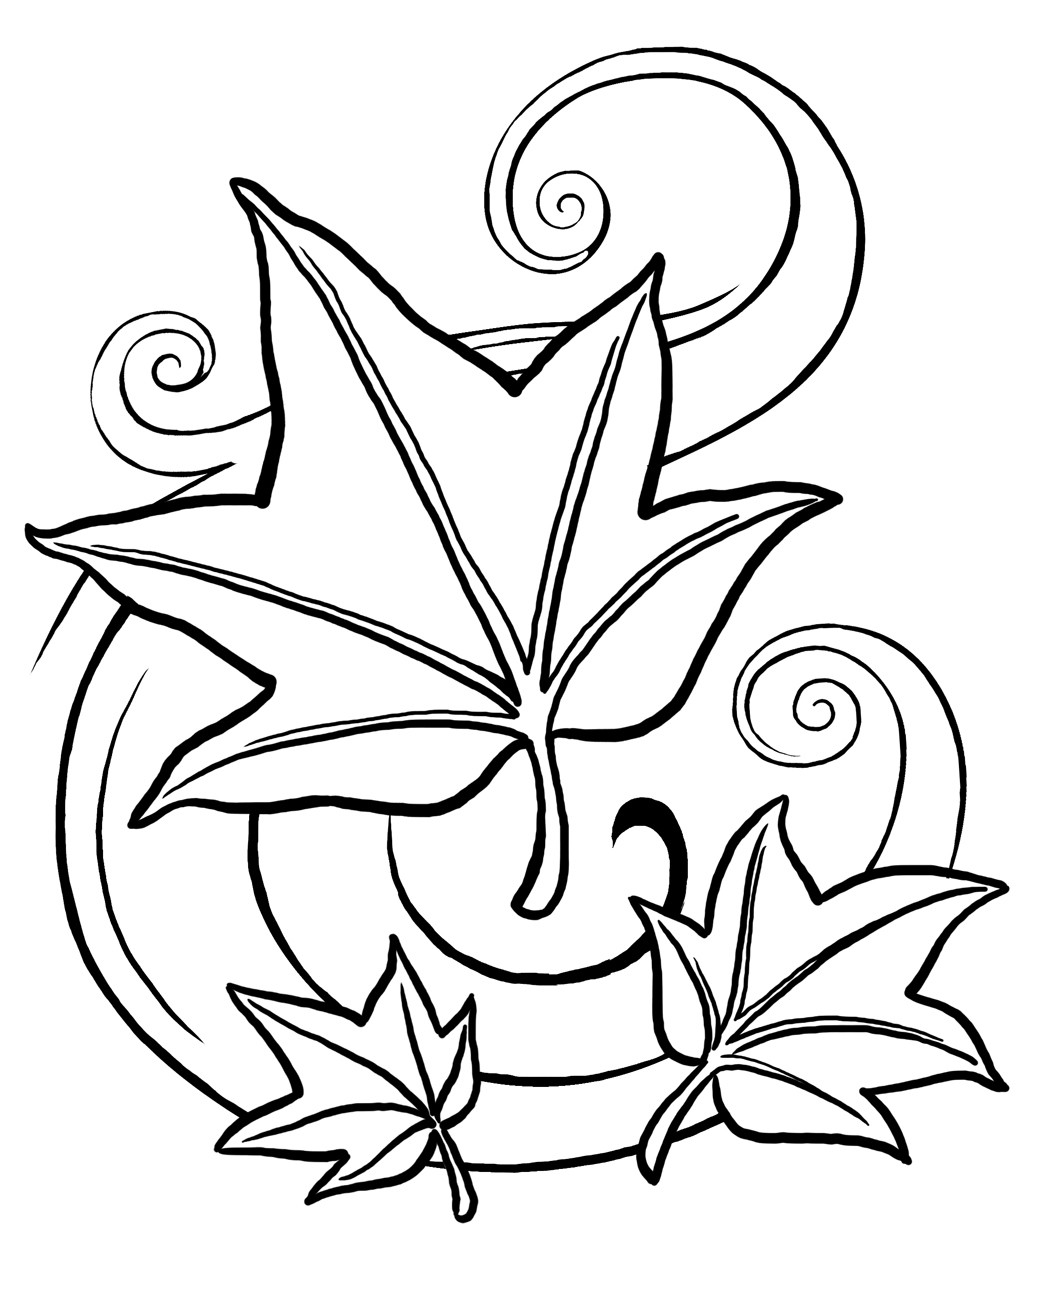 Autumn Leaves Coloring Pages
 Free Printable Leaf Coloring Pages For Kids